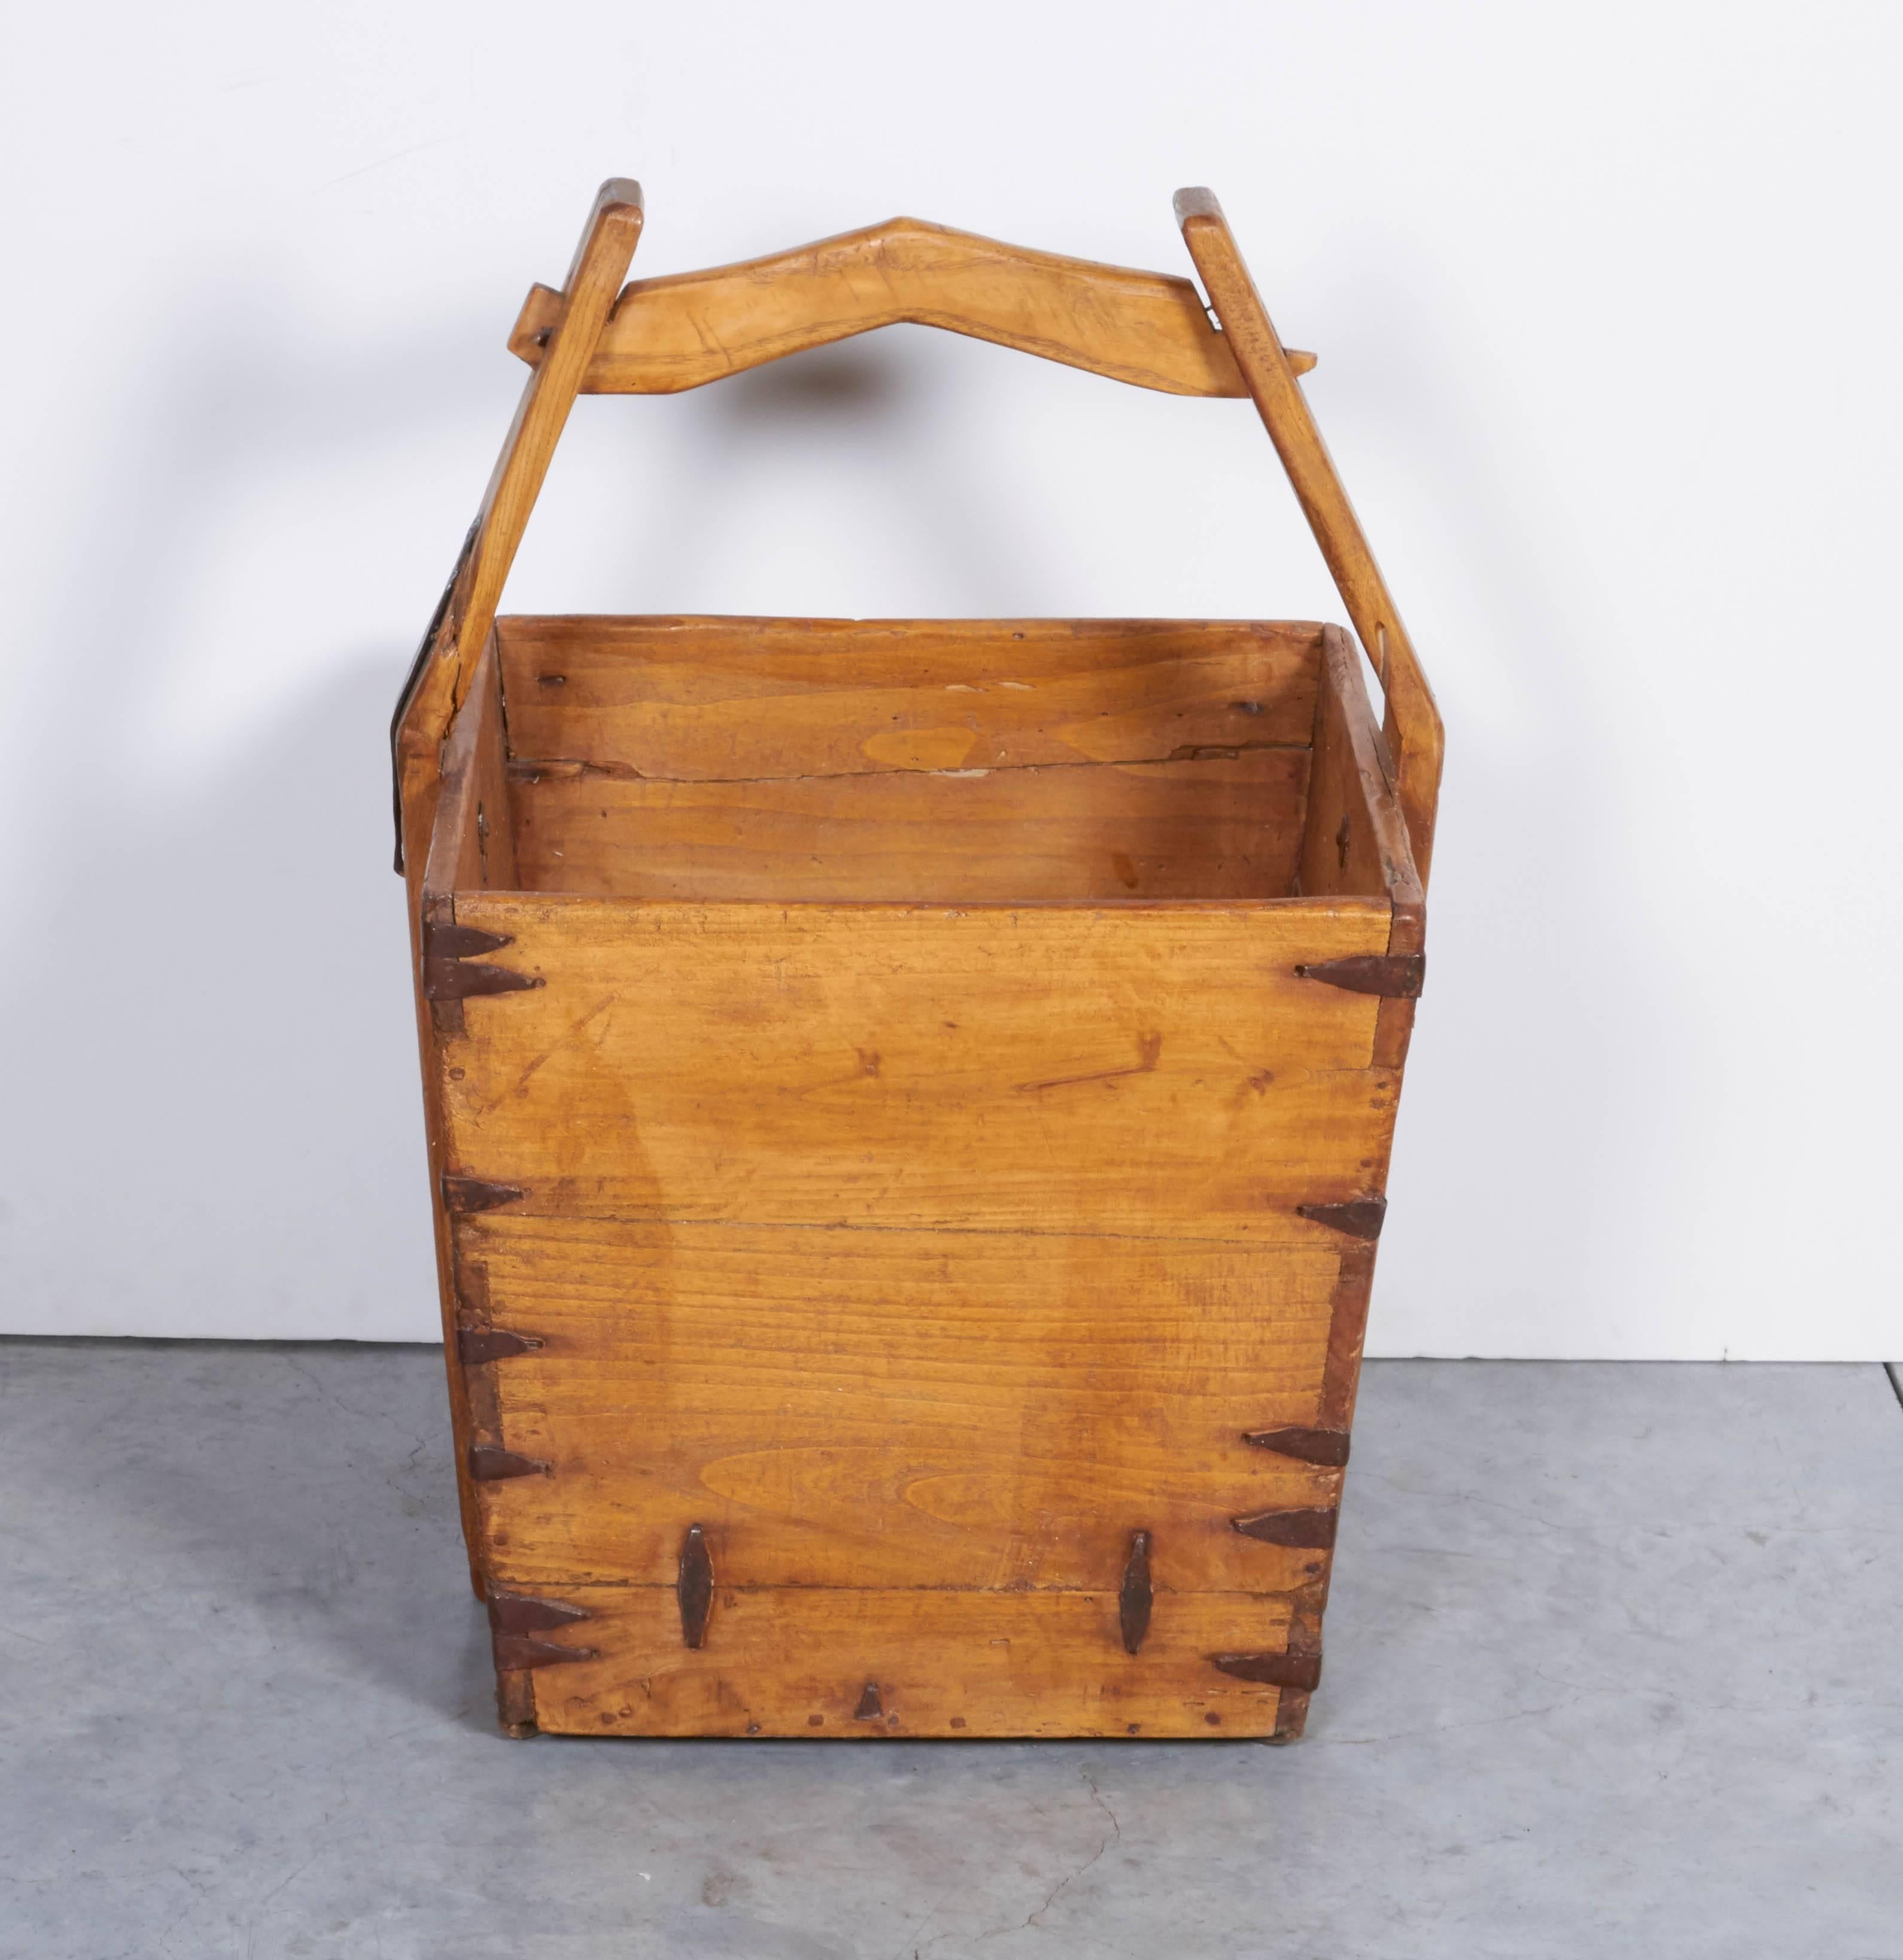 A classically shaped antique Chinese water bucket with original iron fittings. An historical piece with many practical uses including, firewood storage, magazine or book display, or rolled up towels in a beach house. From Shandong Province.
B395.
